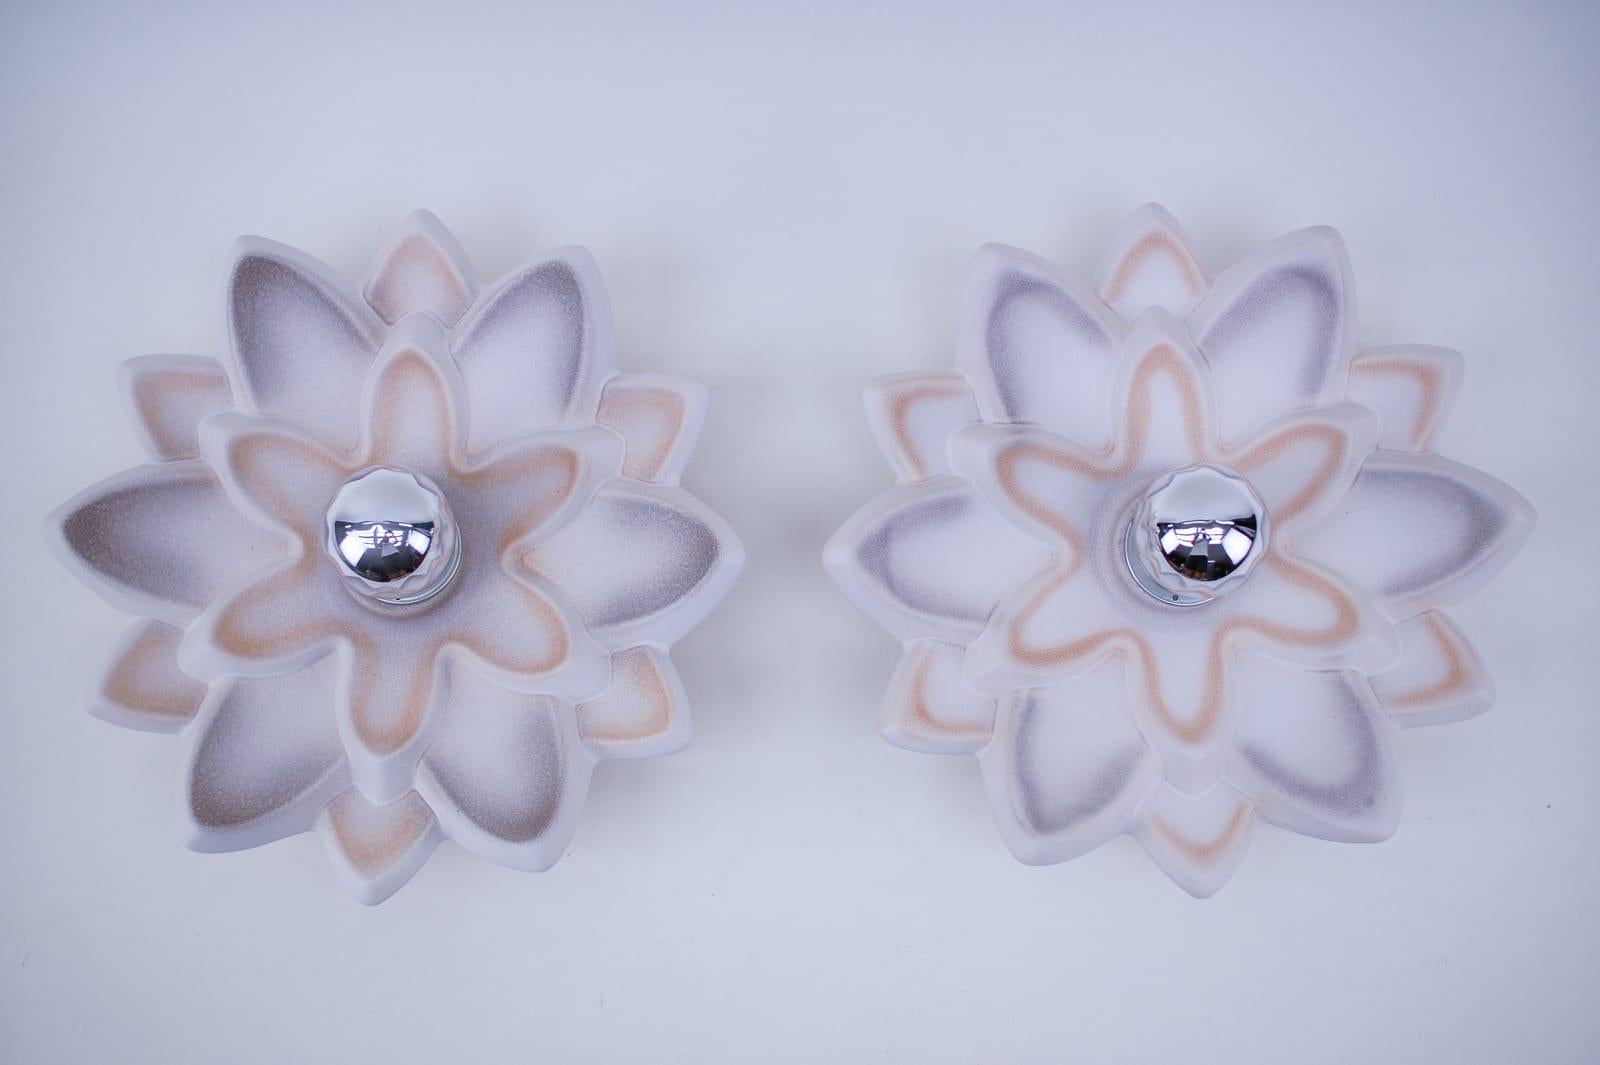 Pair of Space Age Ceramic Flower Wall or Ceiling Lamps, 1960s Germany For Sale 3